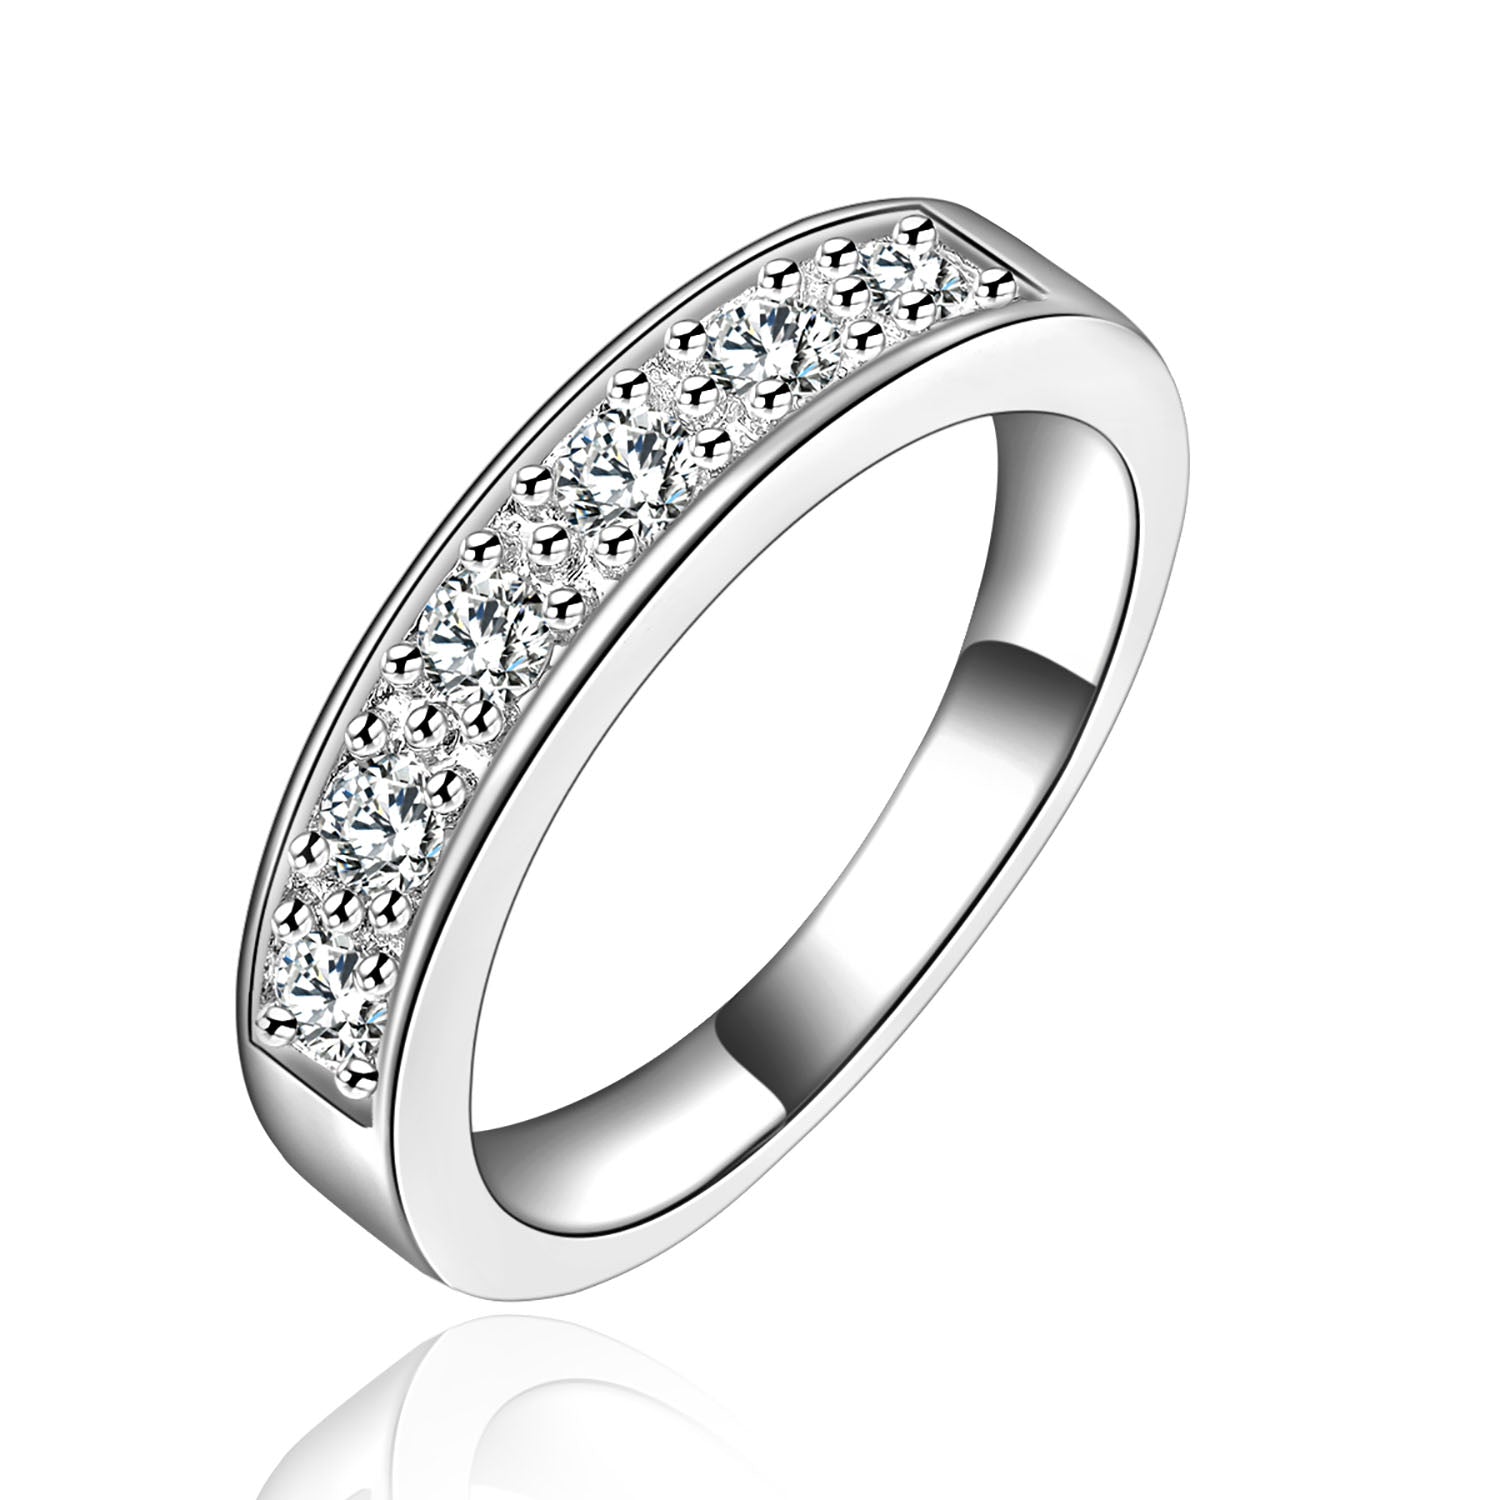 Virginia Cubic Zirconia Anniversary Wedding Band Ring Womens Ginger Lyne Collection - 10